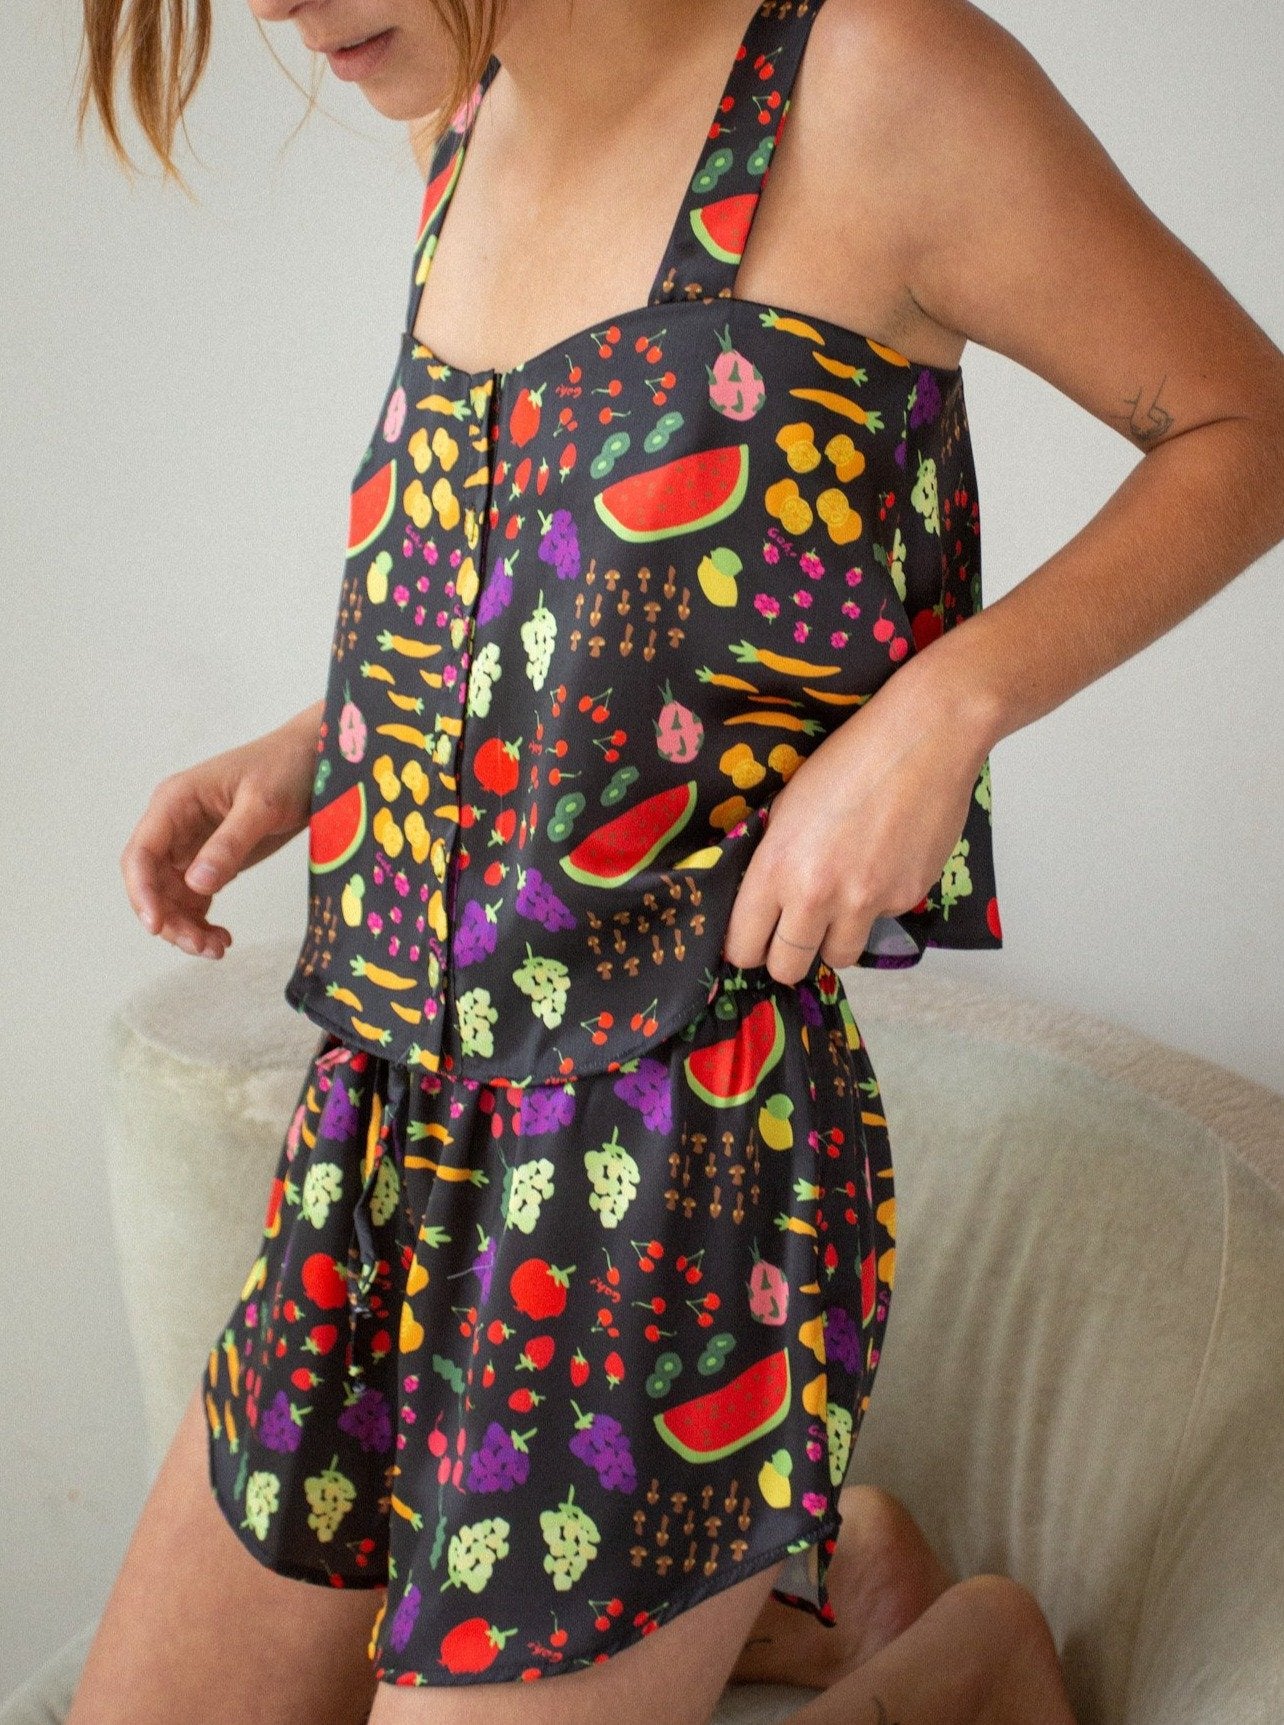 model wearing the black set with colorful fruit printed all over it